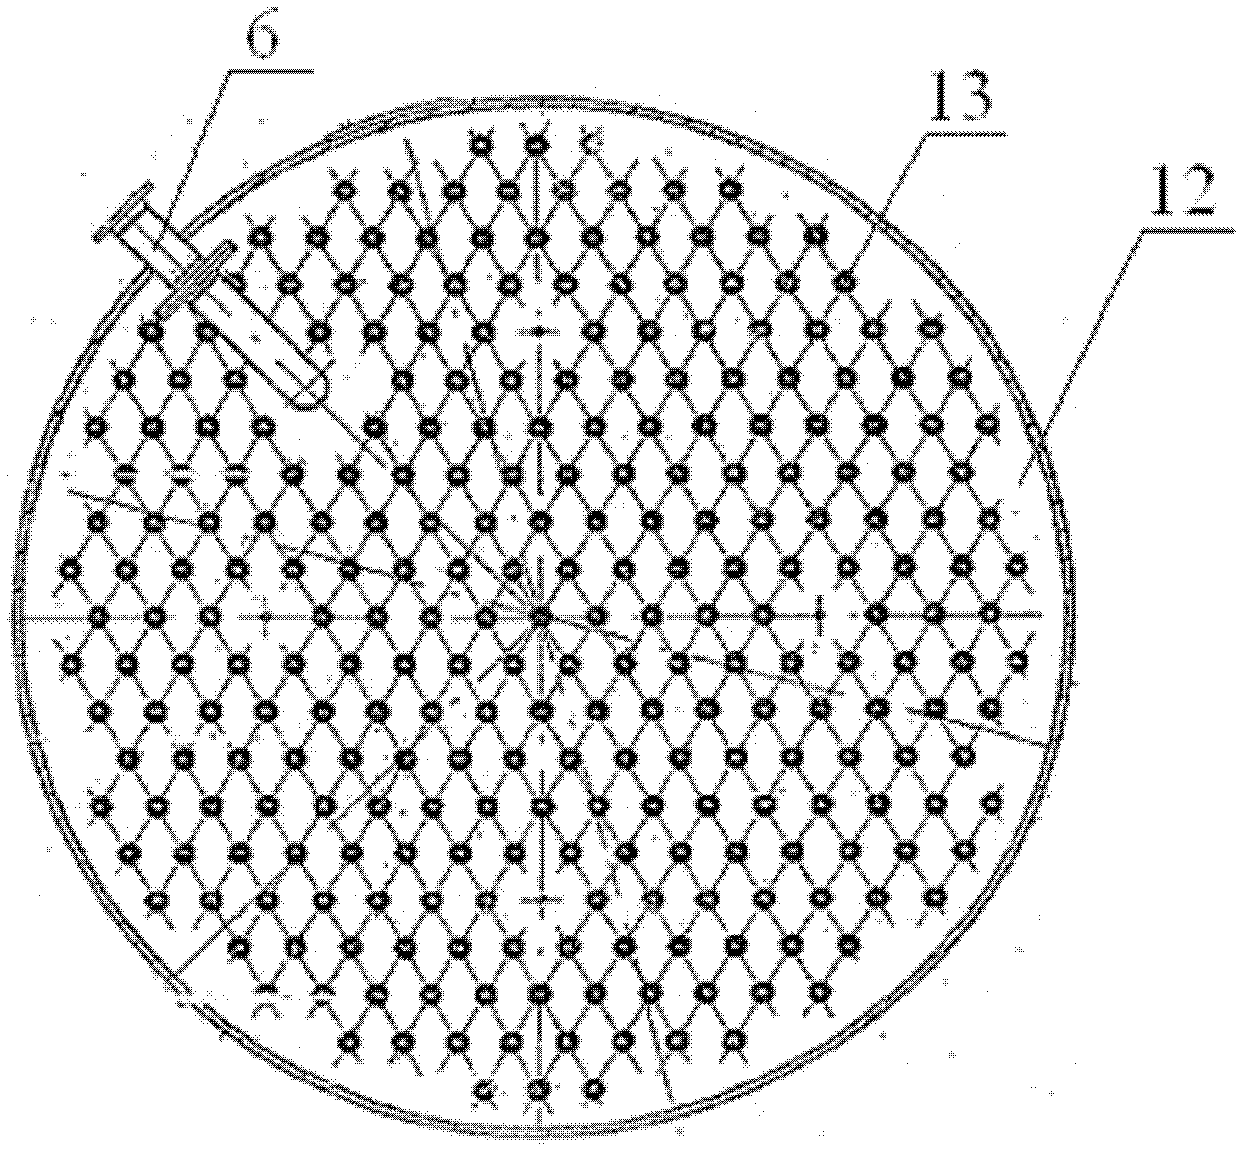 Condensate polishing mixed bed anion-cation resin separation filter and control method thereof